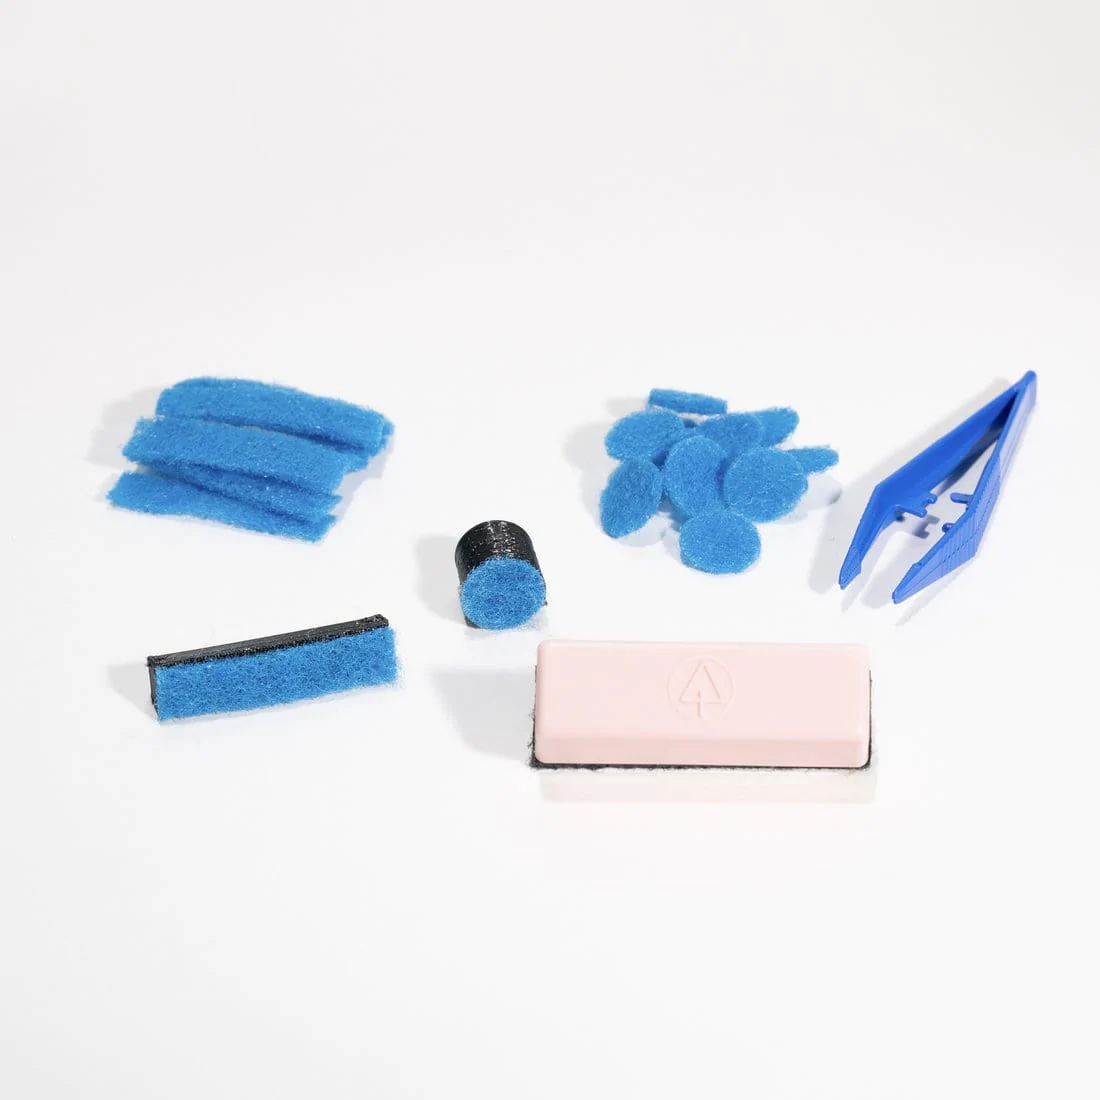 Cleaning Pads, Magnetic Holders, Magnetic Handle, Forceps Tweezers. The full magnetic glass cleaner kit.